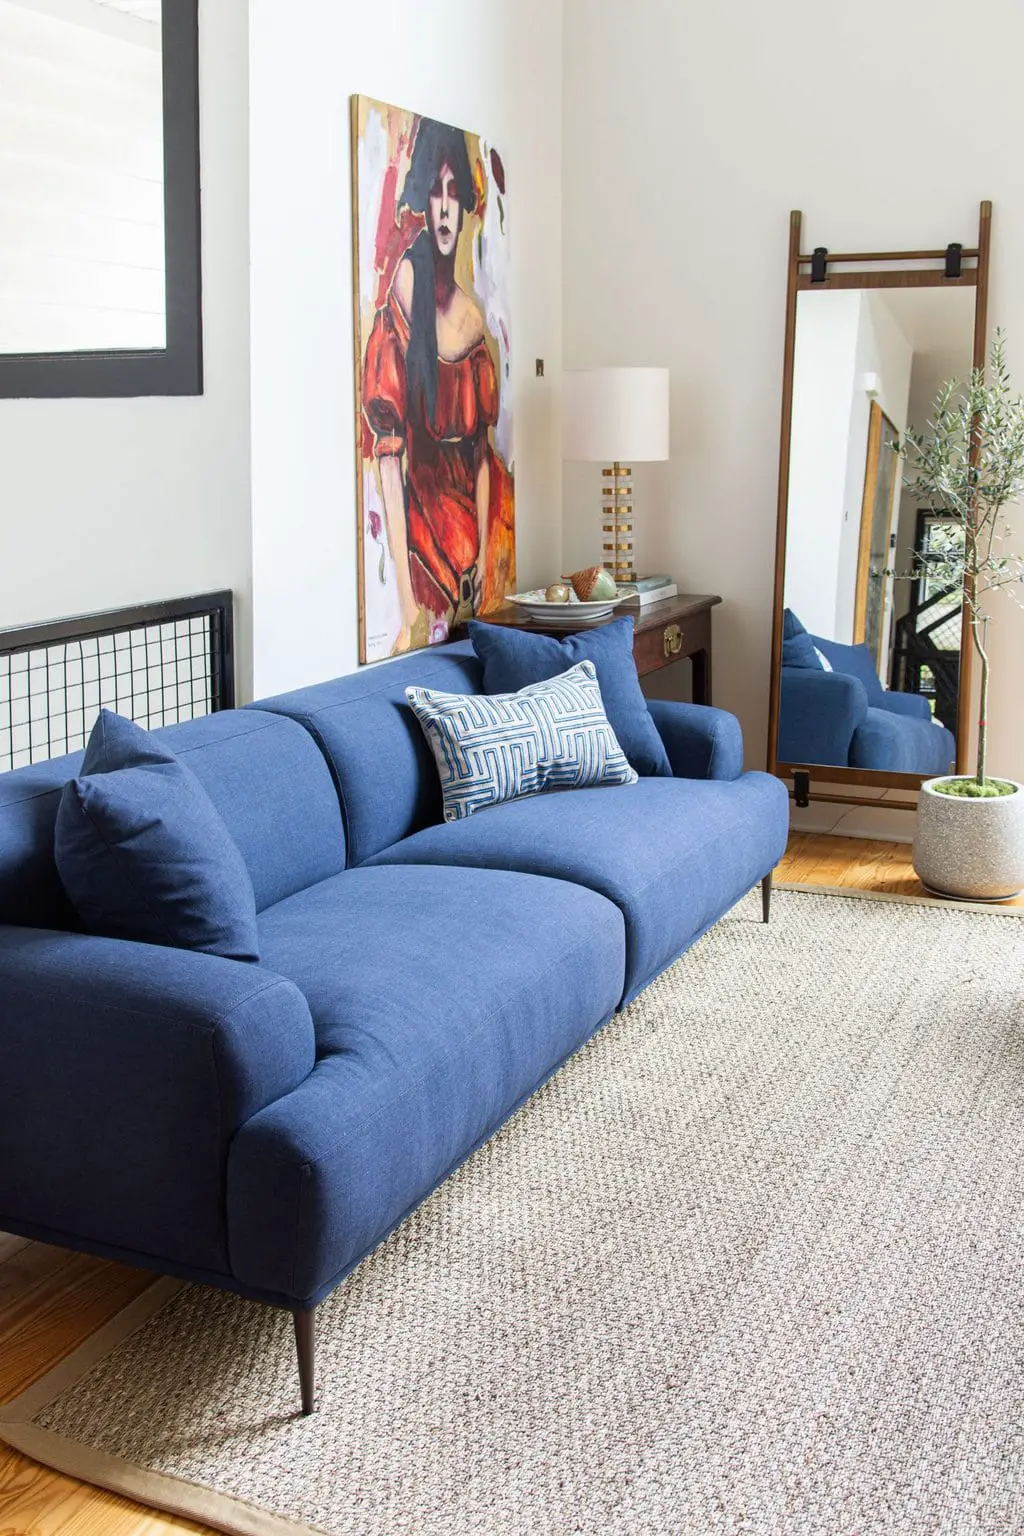 Modern living room design with blue sofa and armchair from Article, Abisko sofa and chair, navy blue sofa, townhouse design ideas by Kevin O'Gara on Thou Swell #article #myarticle #abiskosofa #bluesofa #moderndesign #livingroom #livingroomdesign #homedecor #homedecorideas